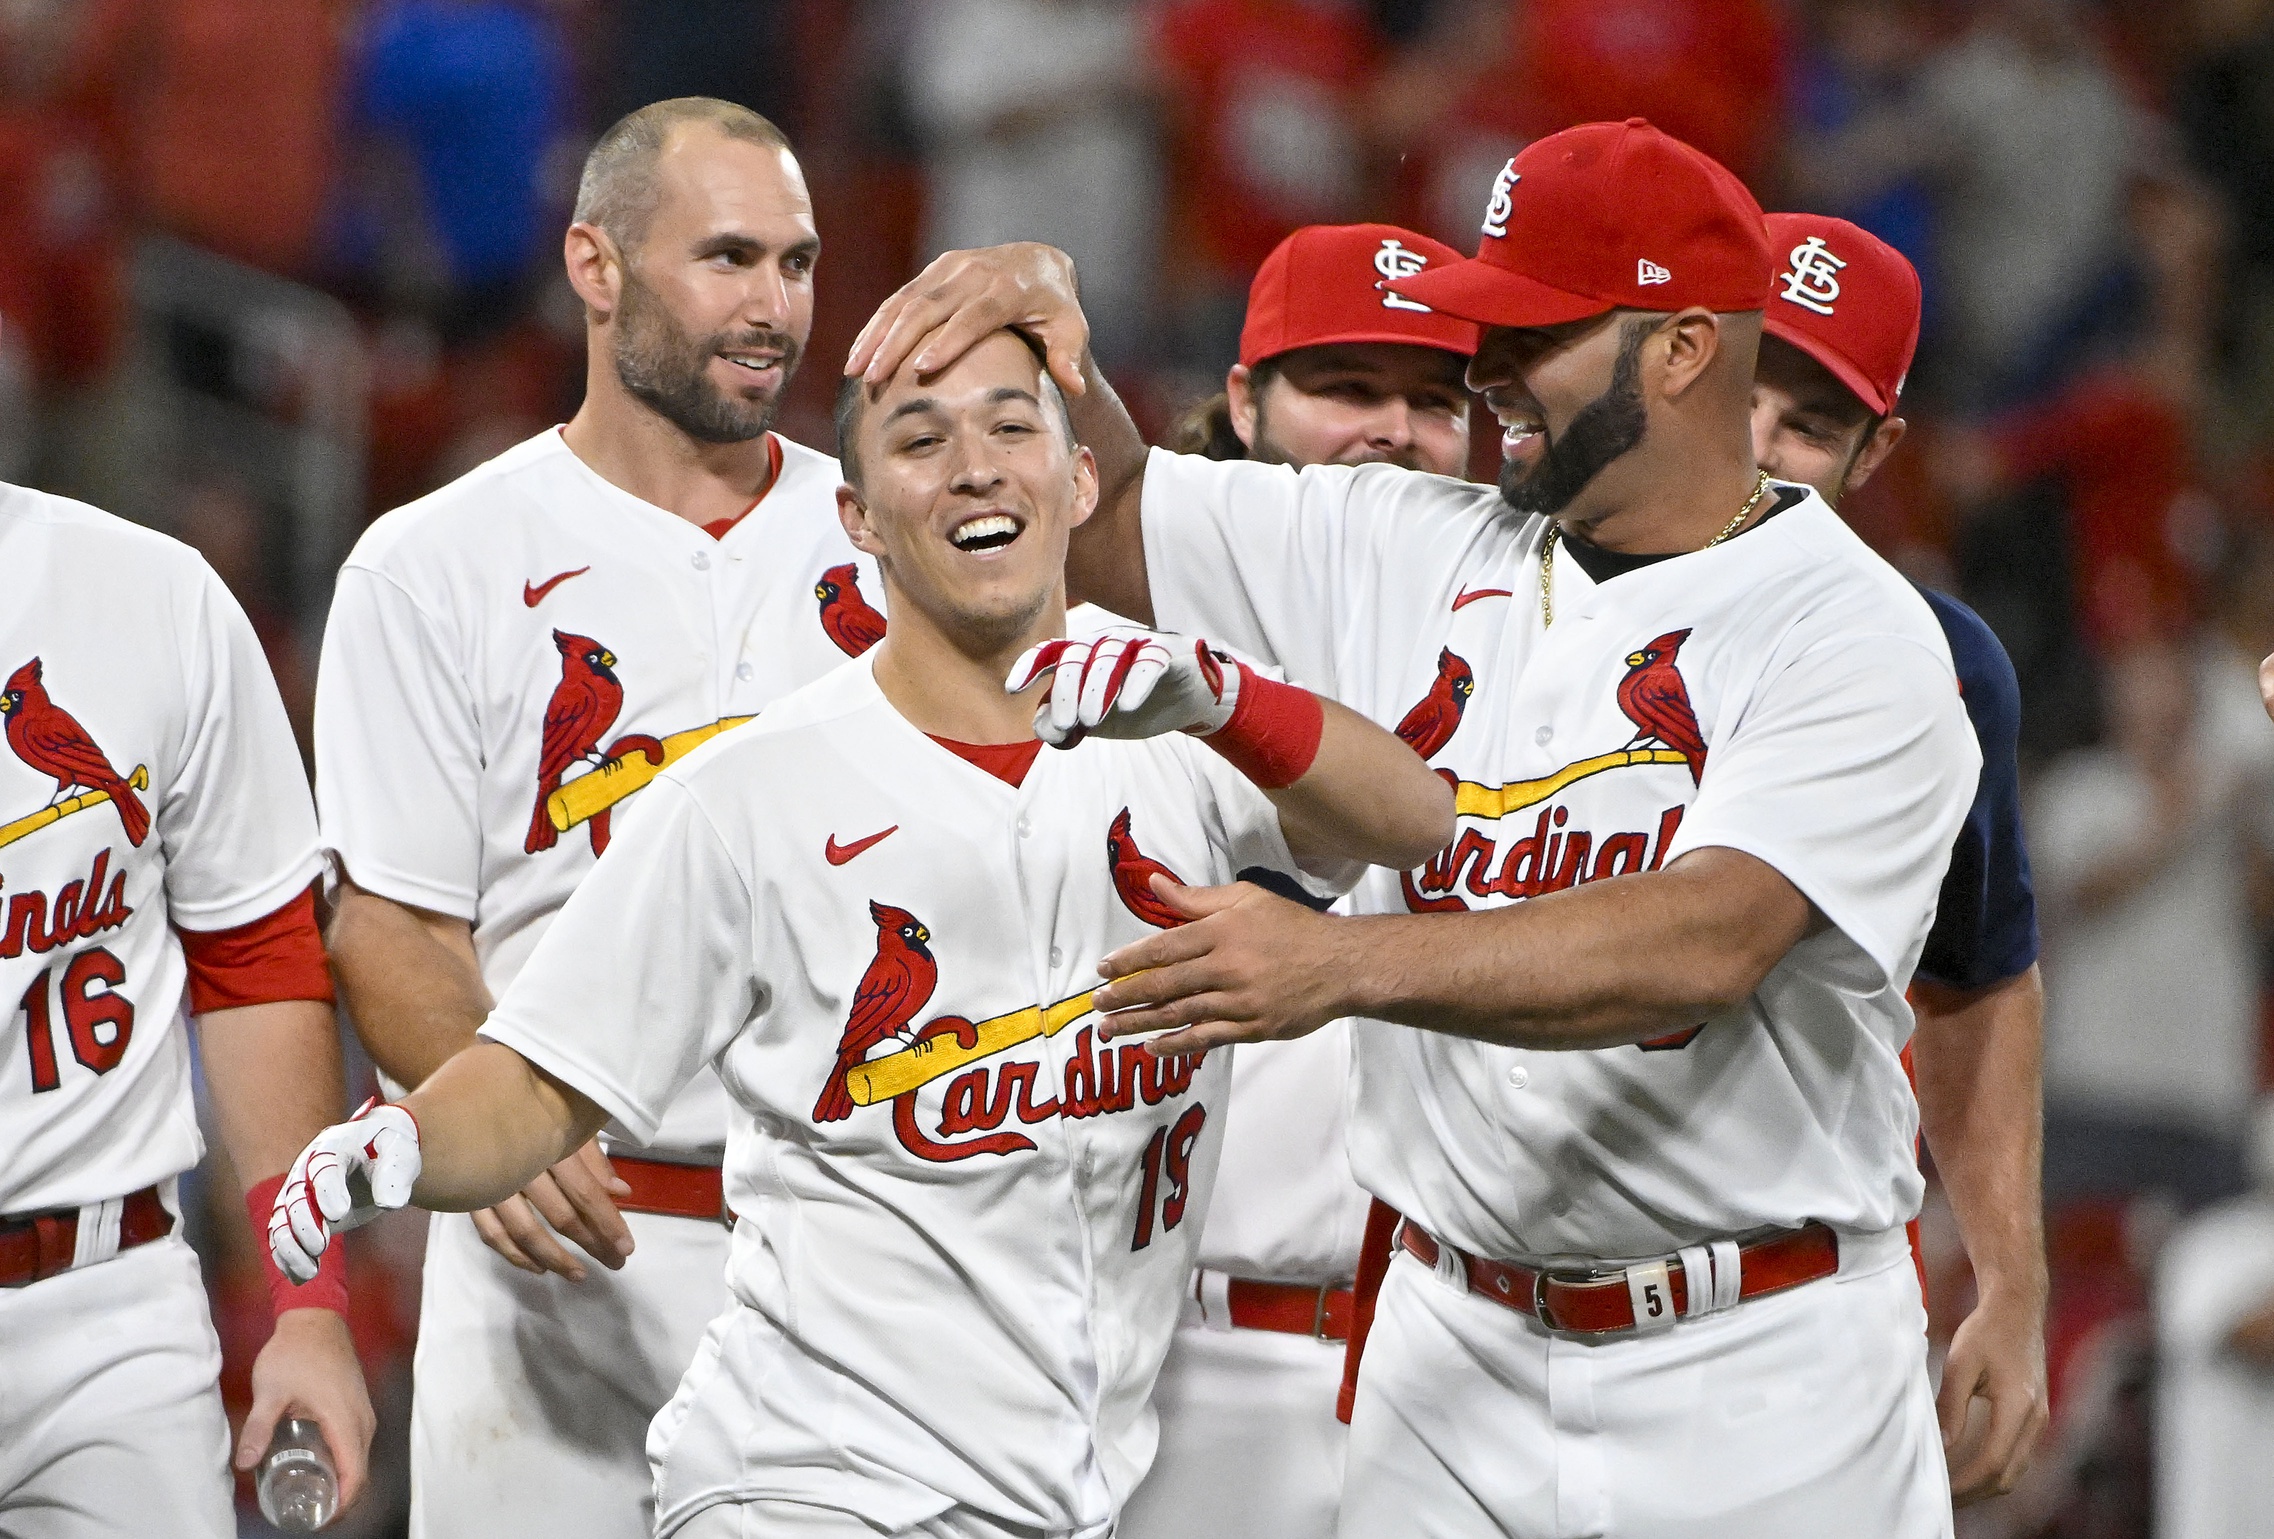 Bernies Redbird Review In A Season To Remember, The Cardinals Rise Up For Another Unforgettable Triumph.